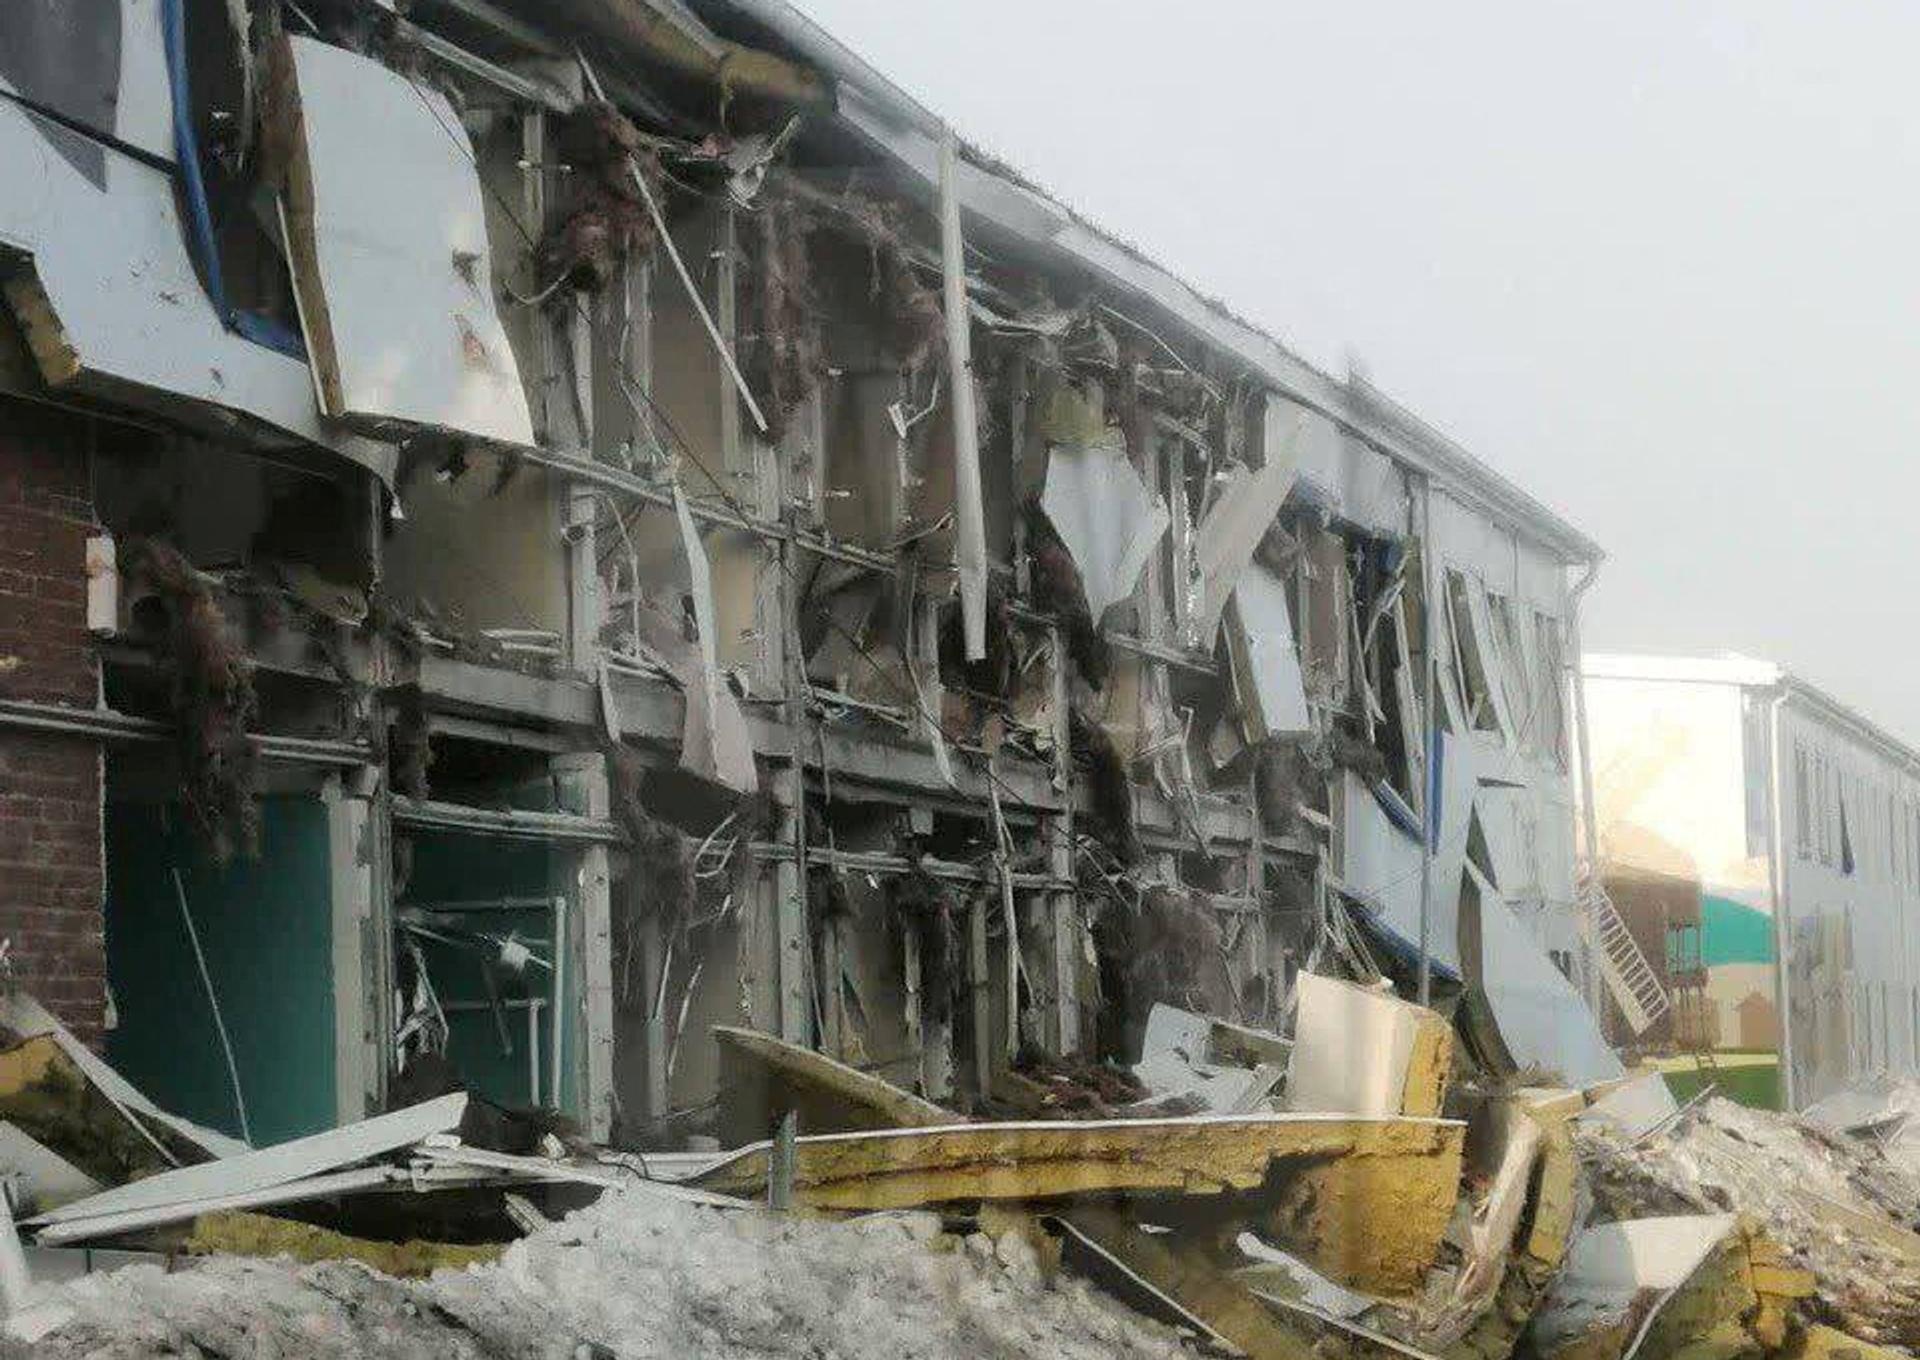  A damaged building in Tatarstan following a Ukrainian drone attack on April 2.